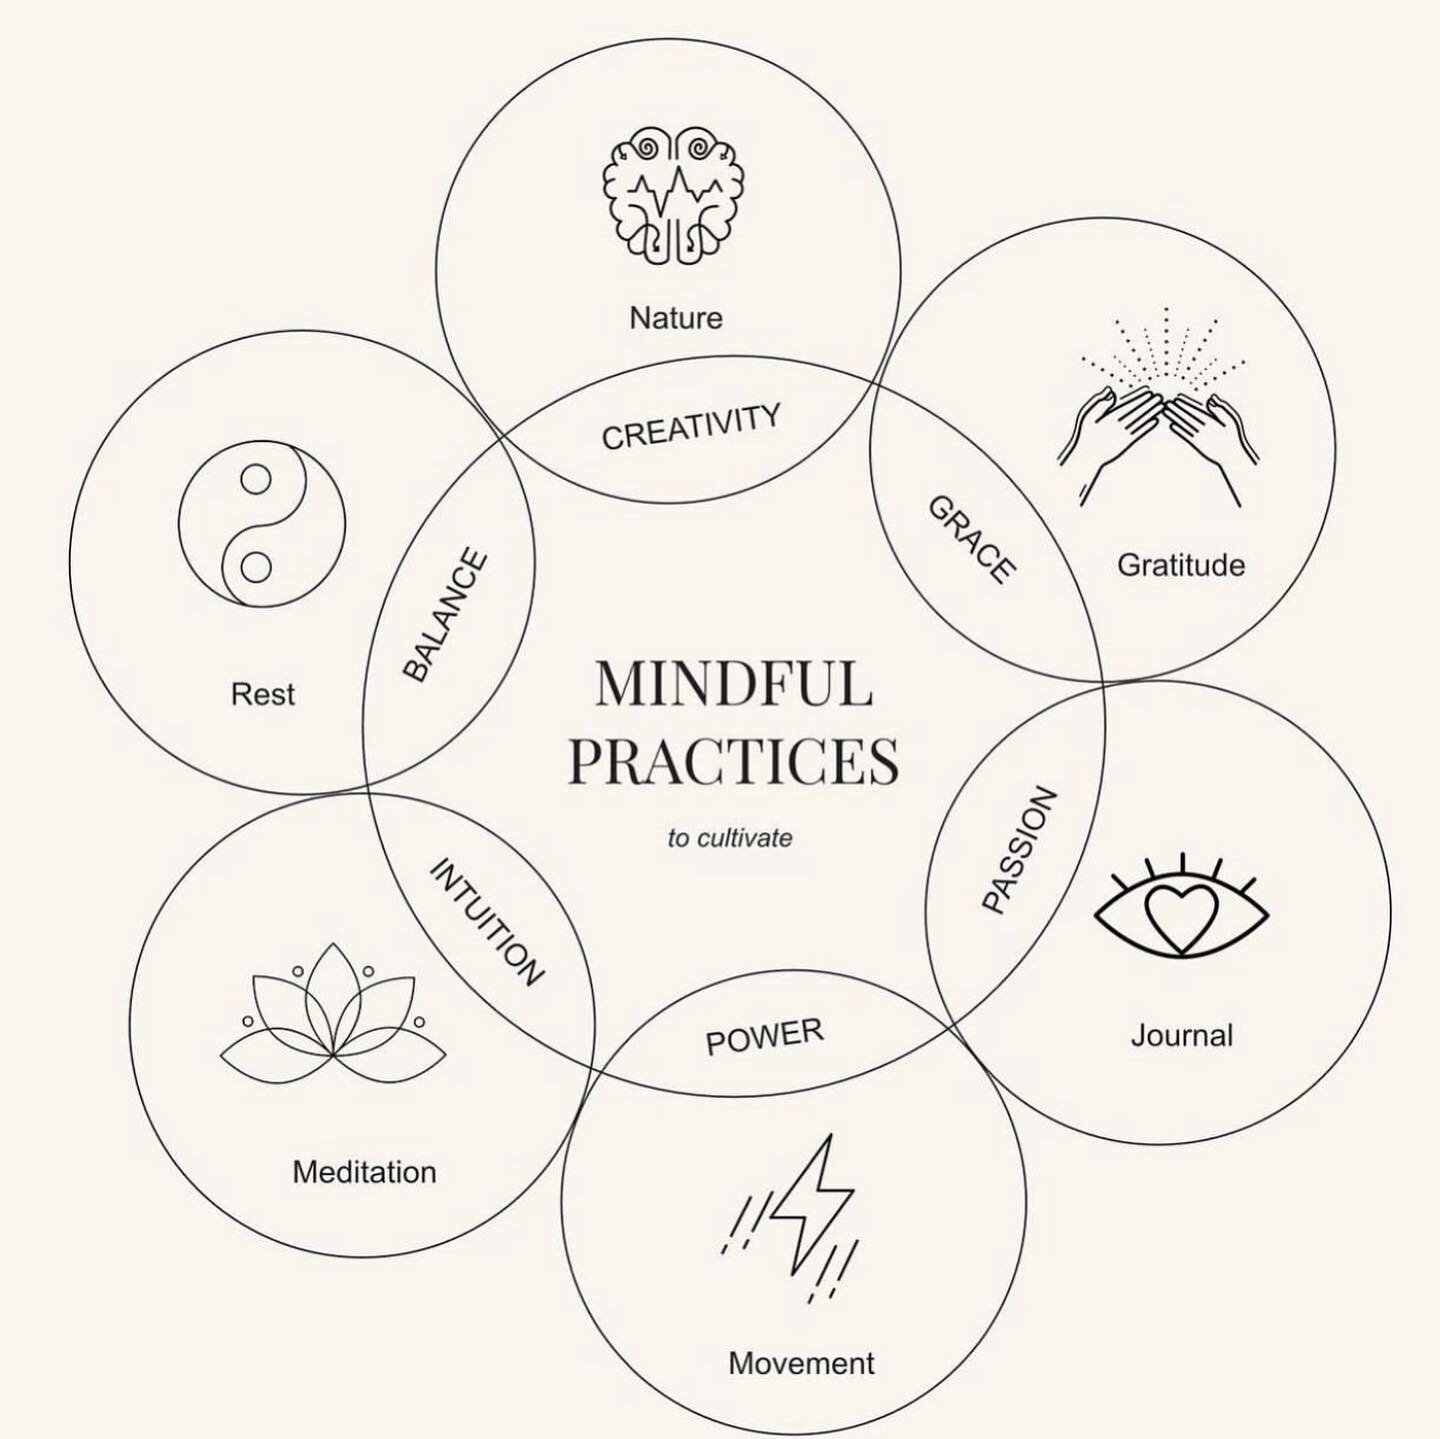 Mindfulness involves paying attention to the present moment without judgement, allowing you to rest your body-mind. Research shows that they can help you reduce stress, feel more at ease and reduce anxiety. 

My favourite practices come tantric Buddh